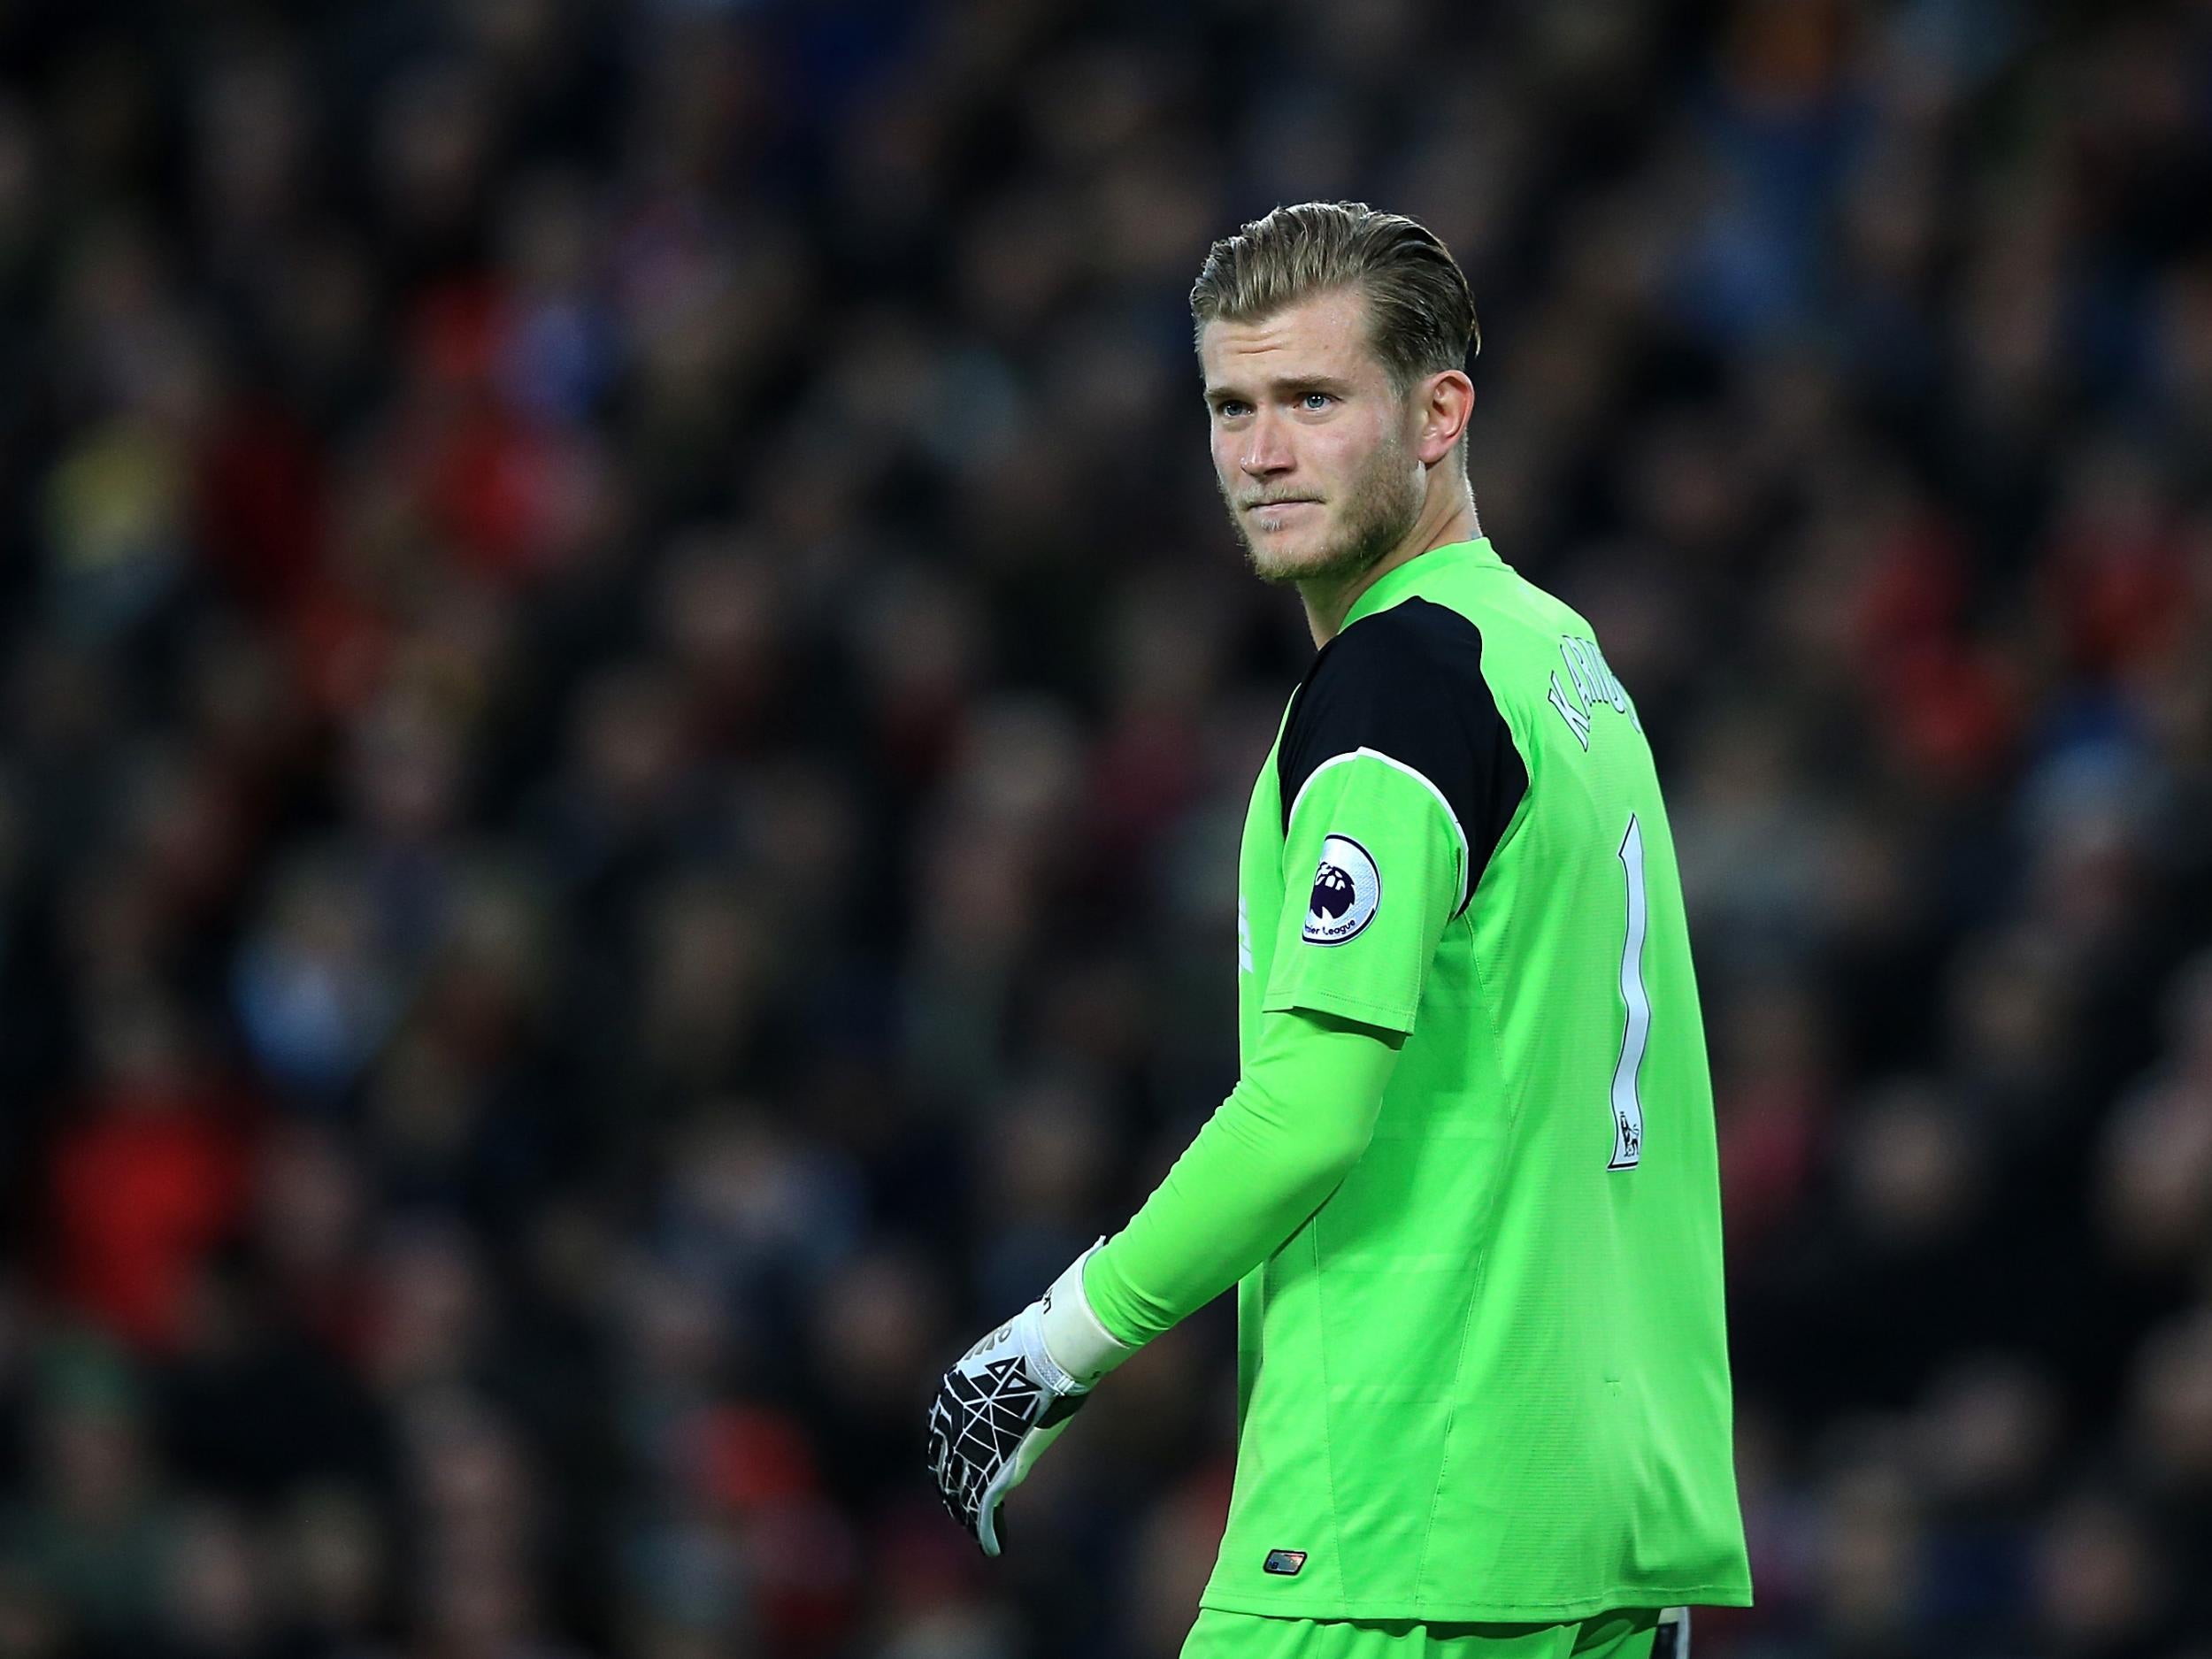 Karius made just 10 Premier League starts last season after losing his place to Simon Mignolet